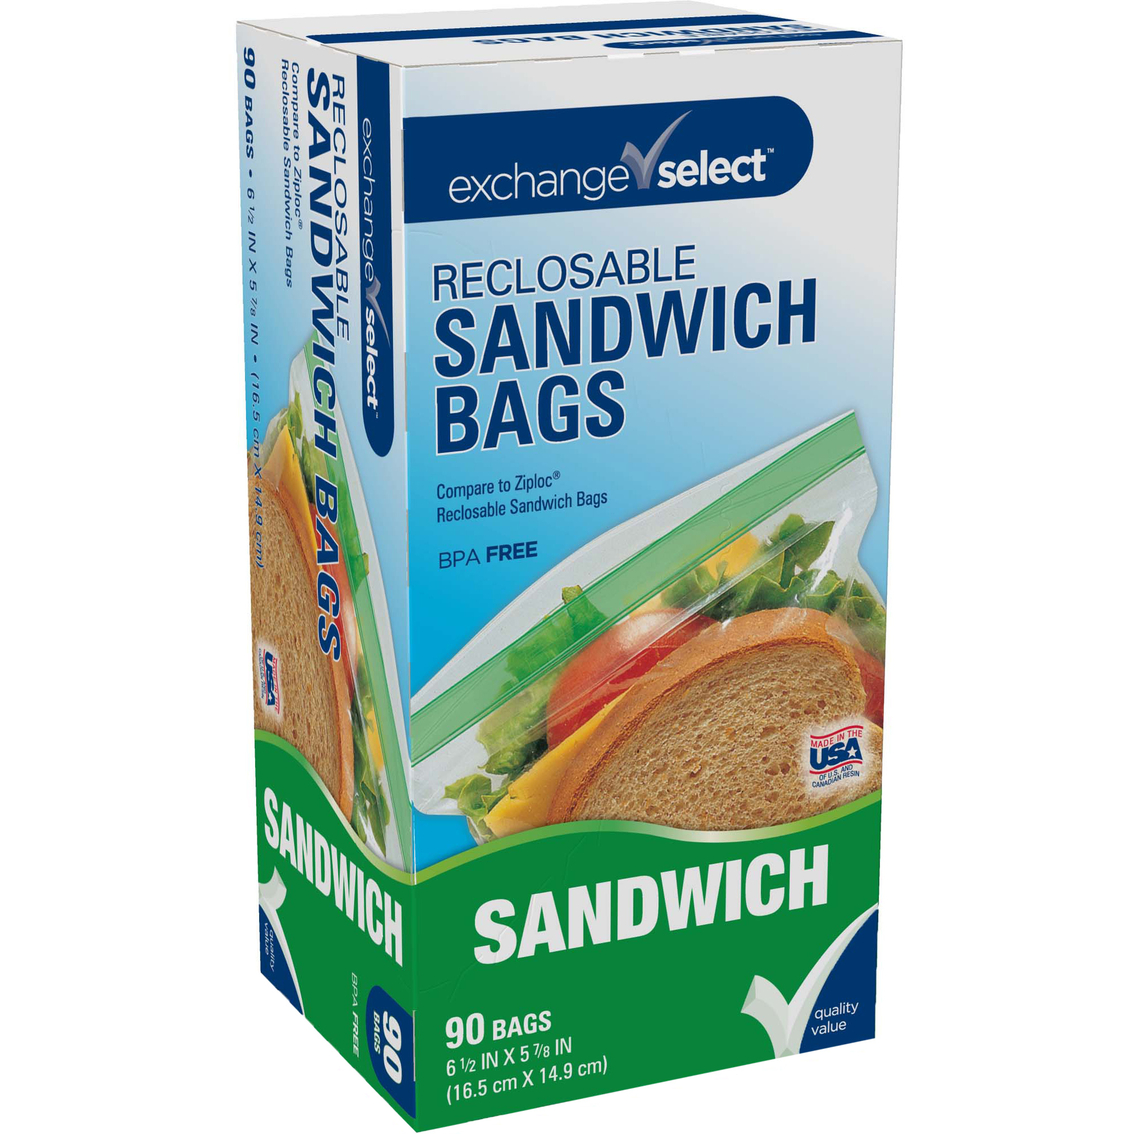 Exchange Select Reclosable Sandwich Bags 90 ct. - Image 3 of 4